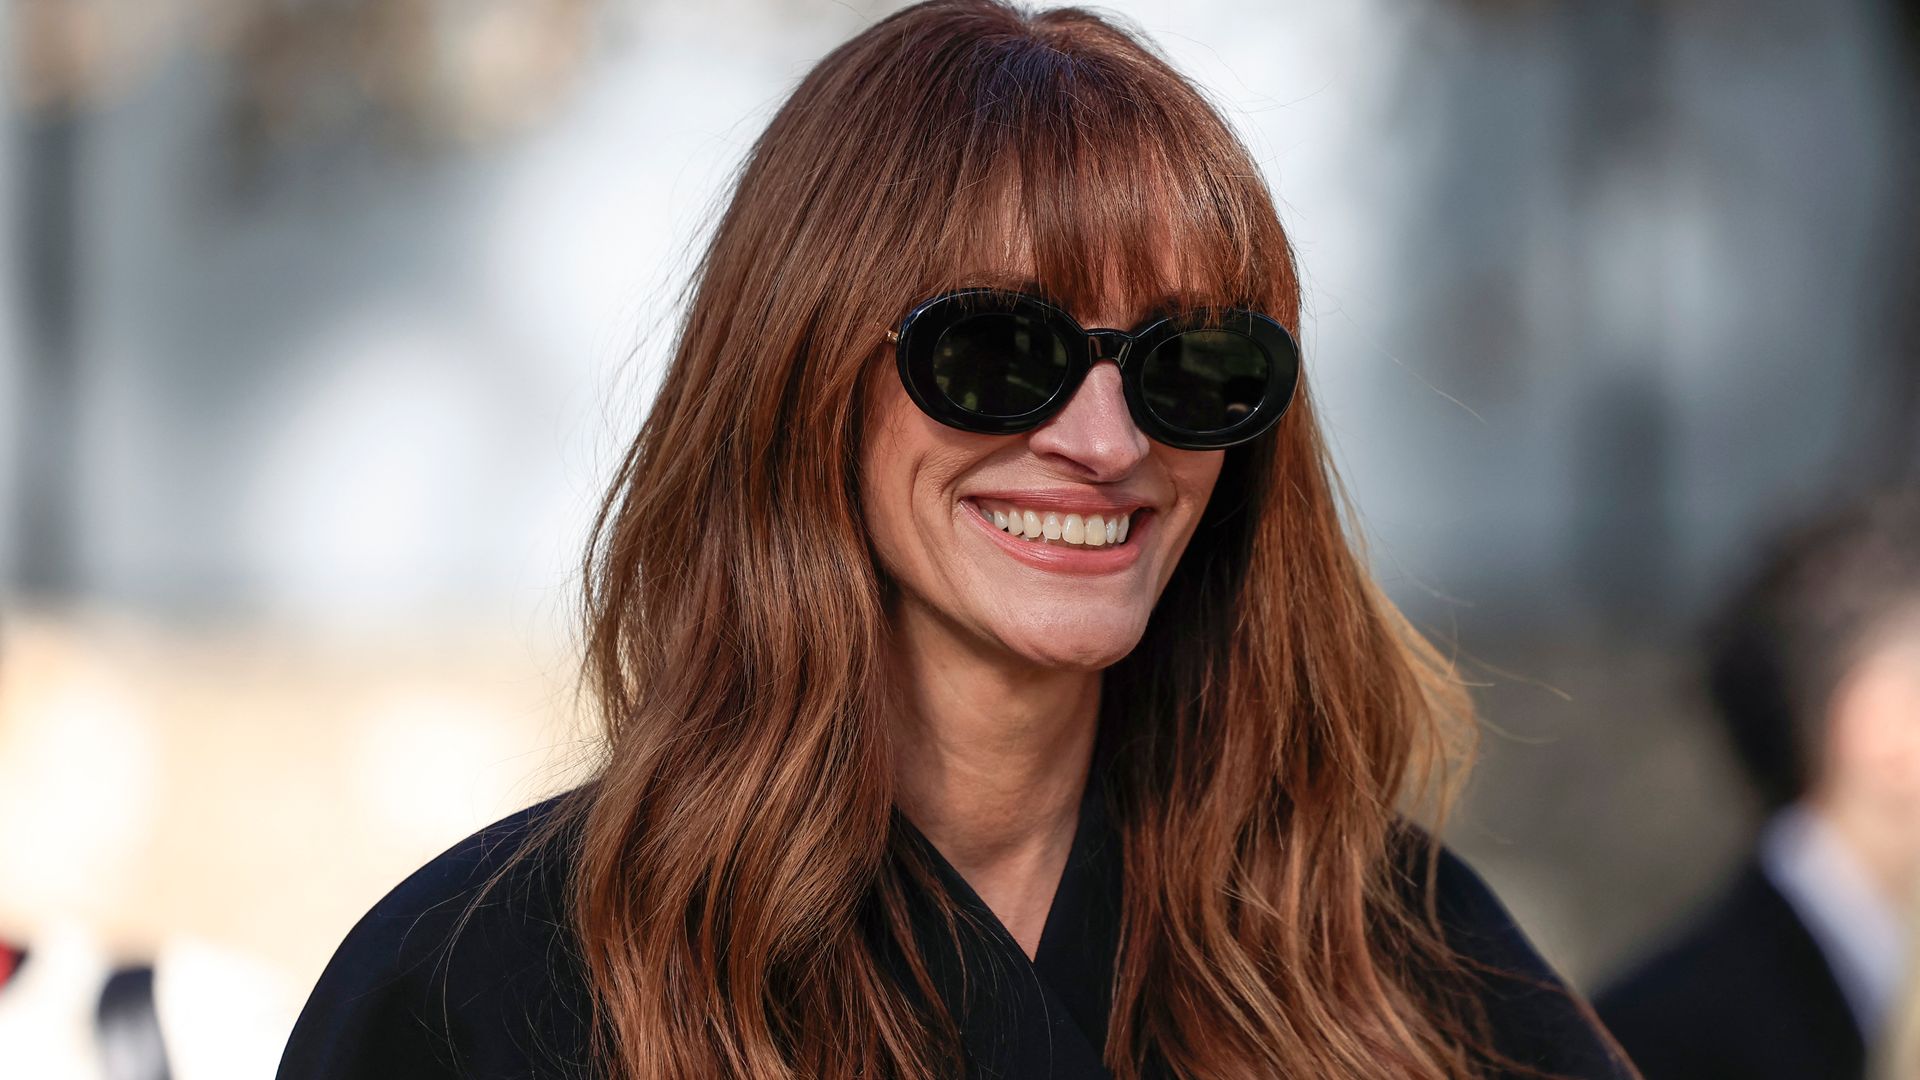 Julia Roberts arrives for the Jacquemus Womenswear Ready-to-wear Spring-Summer 2024 collection at Maeght Foundation, in Saint-Paul-de-Vence, southern France, on January 29, 2024. (Photo by Valery HACHE / AFP) (Photo by VALERY HACHE/AFP via Getty Images)